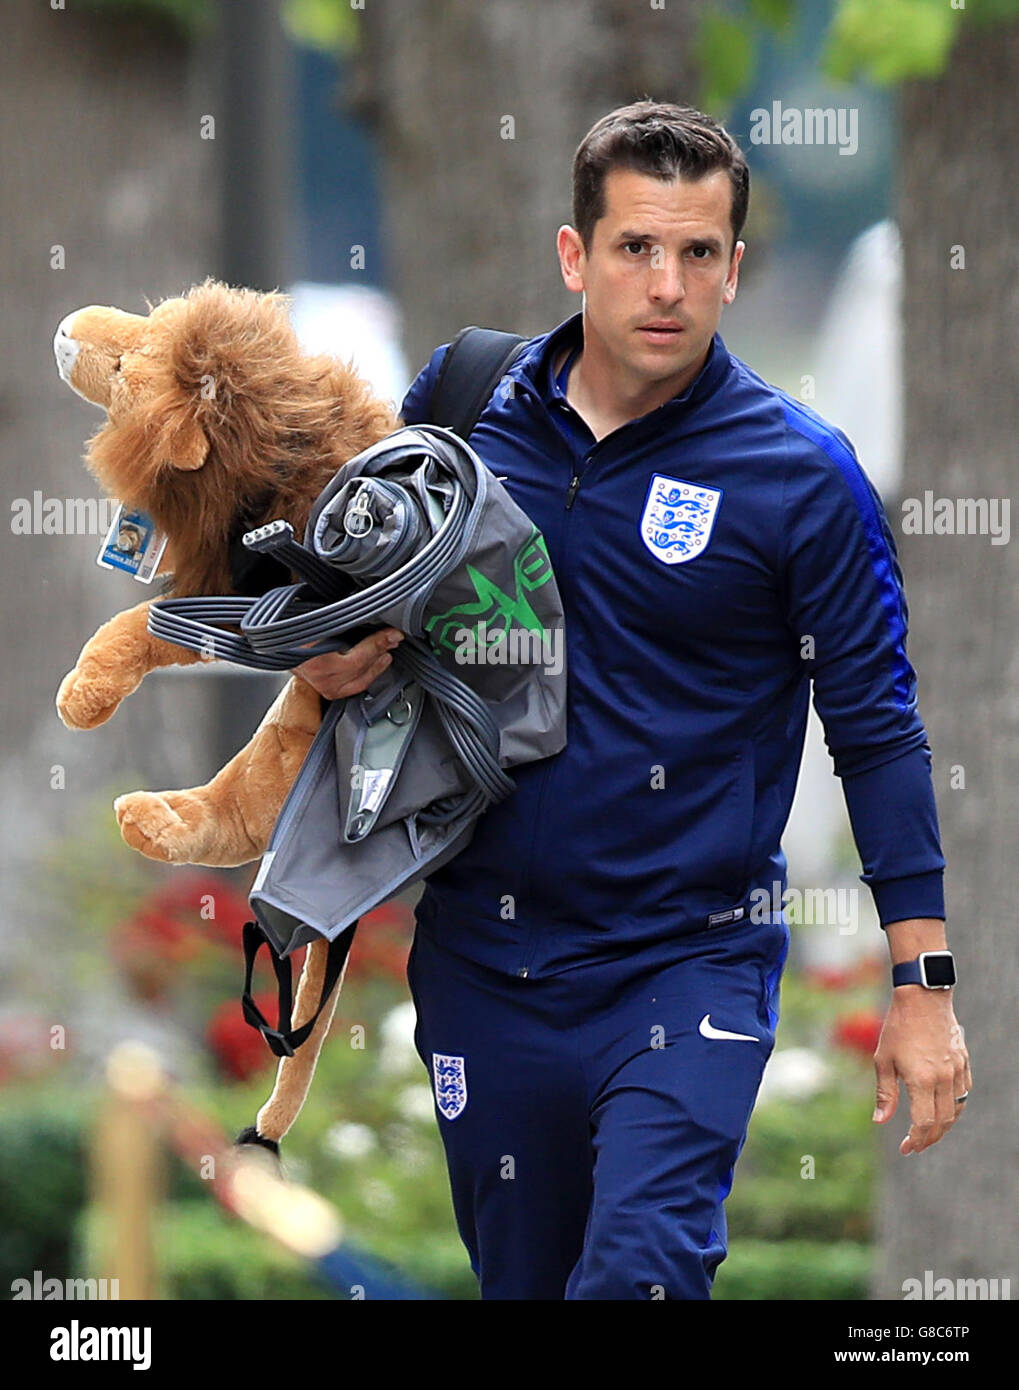 England elite physiotherapist Steve Kemp carrying mascot Leo the Lion as he arrives at the team hotel in Chantilly, France. England were knocked out at the round of 16 stage of the 2016 European Championships last night after losing 2-1 to Iceland. Stock Photo